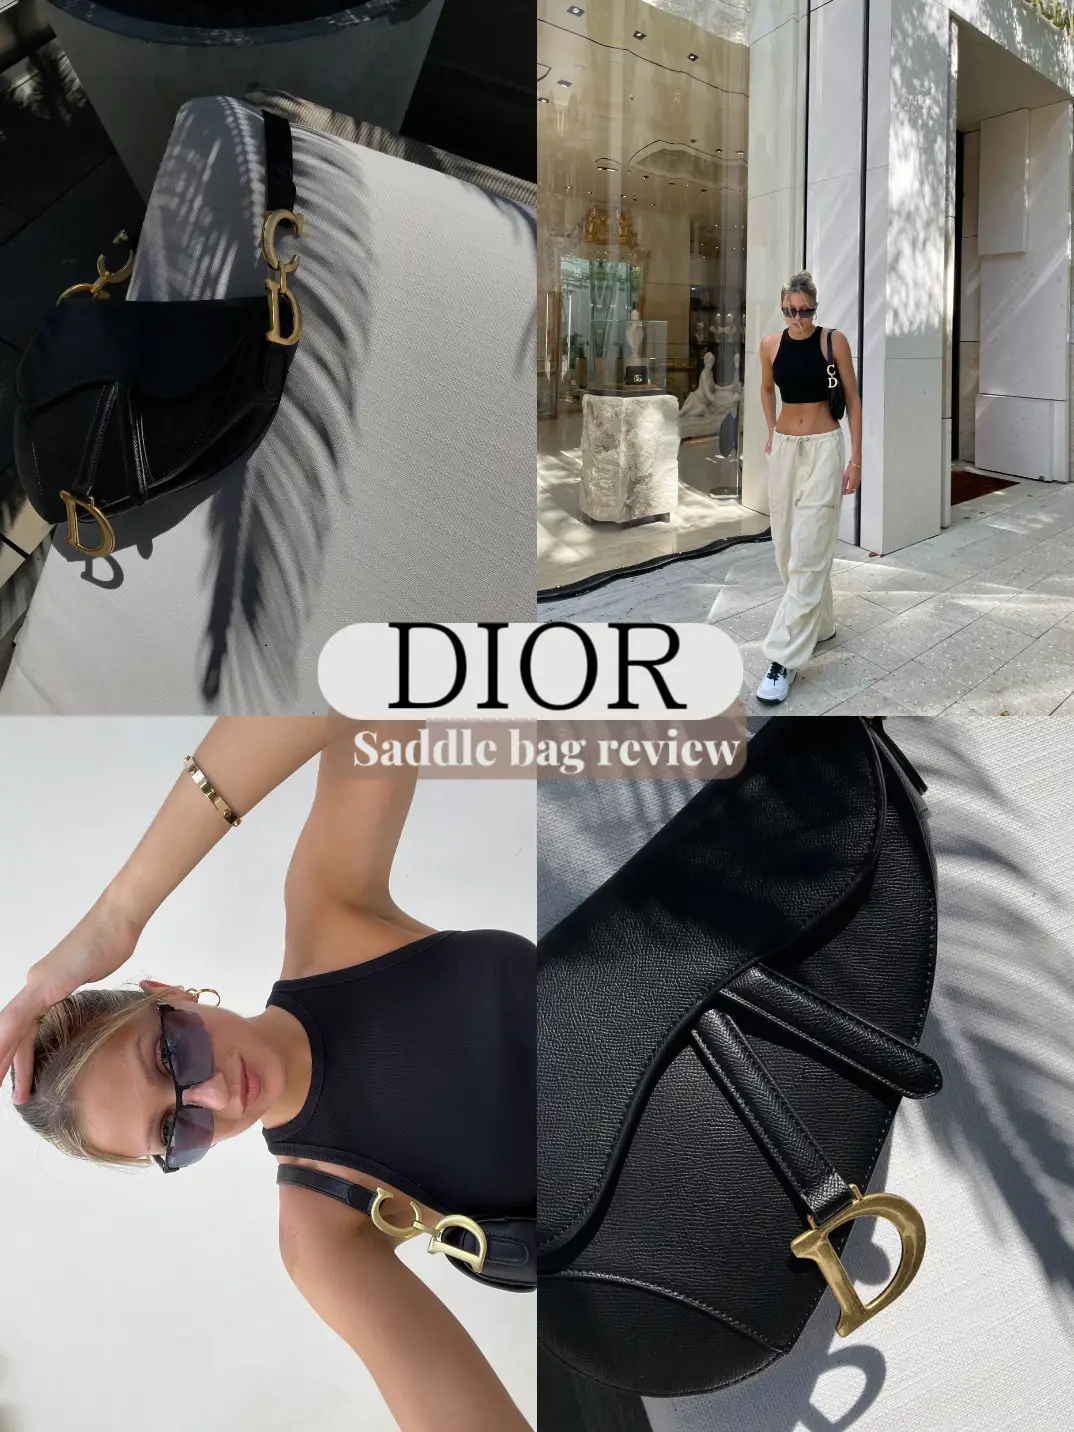 Dior Saddle bag review🖤, Gallery posted by Daria